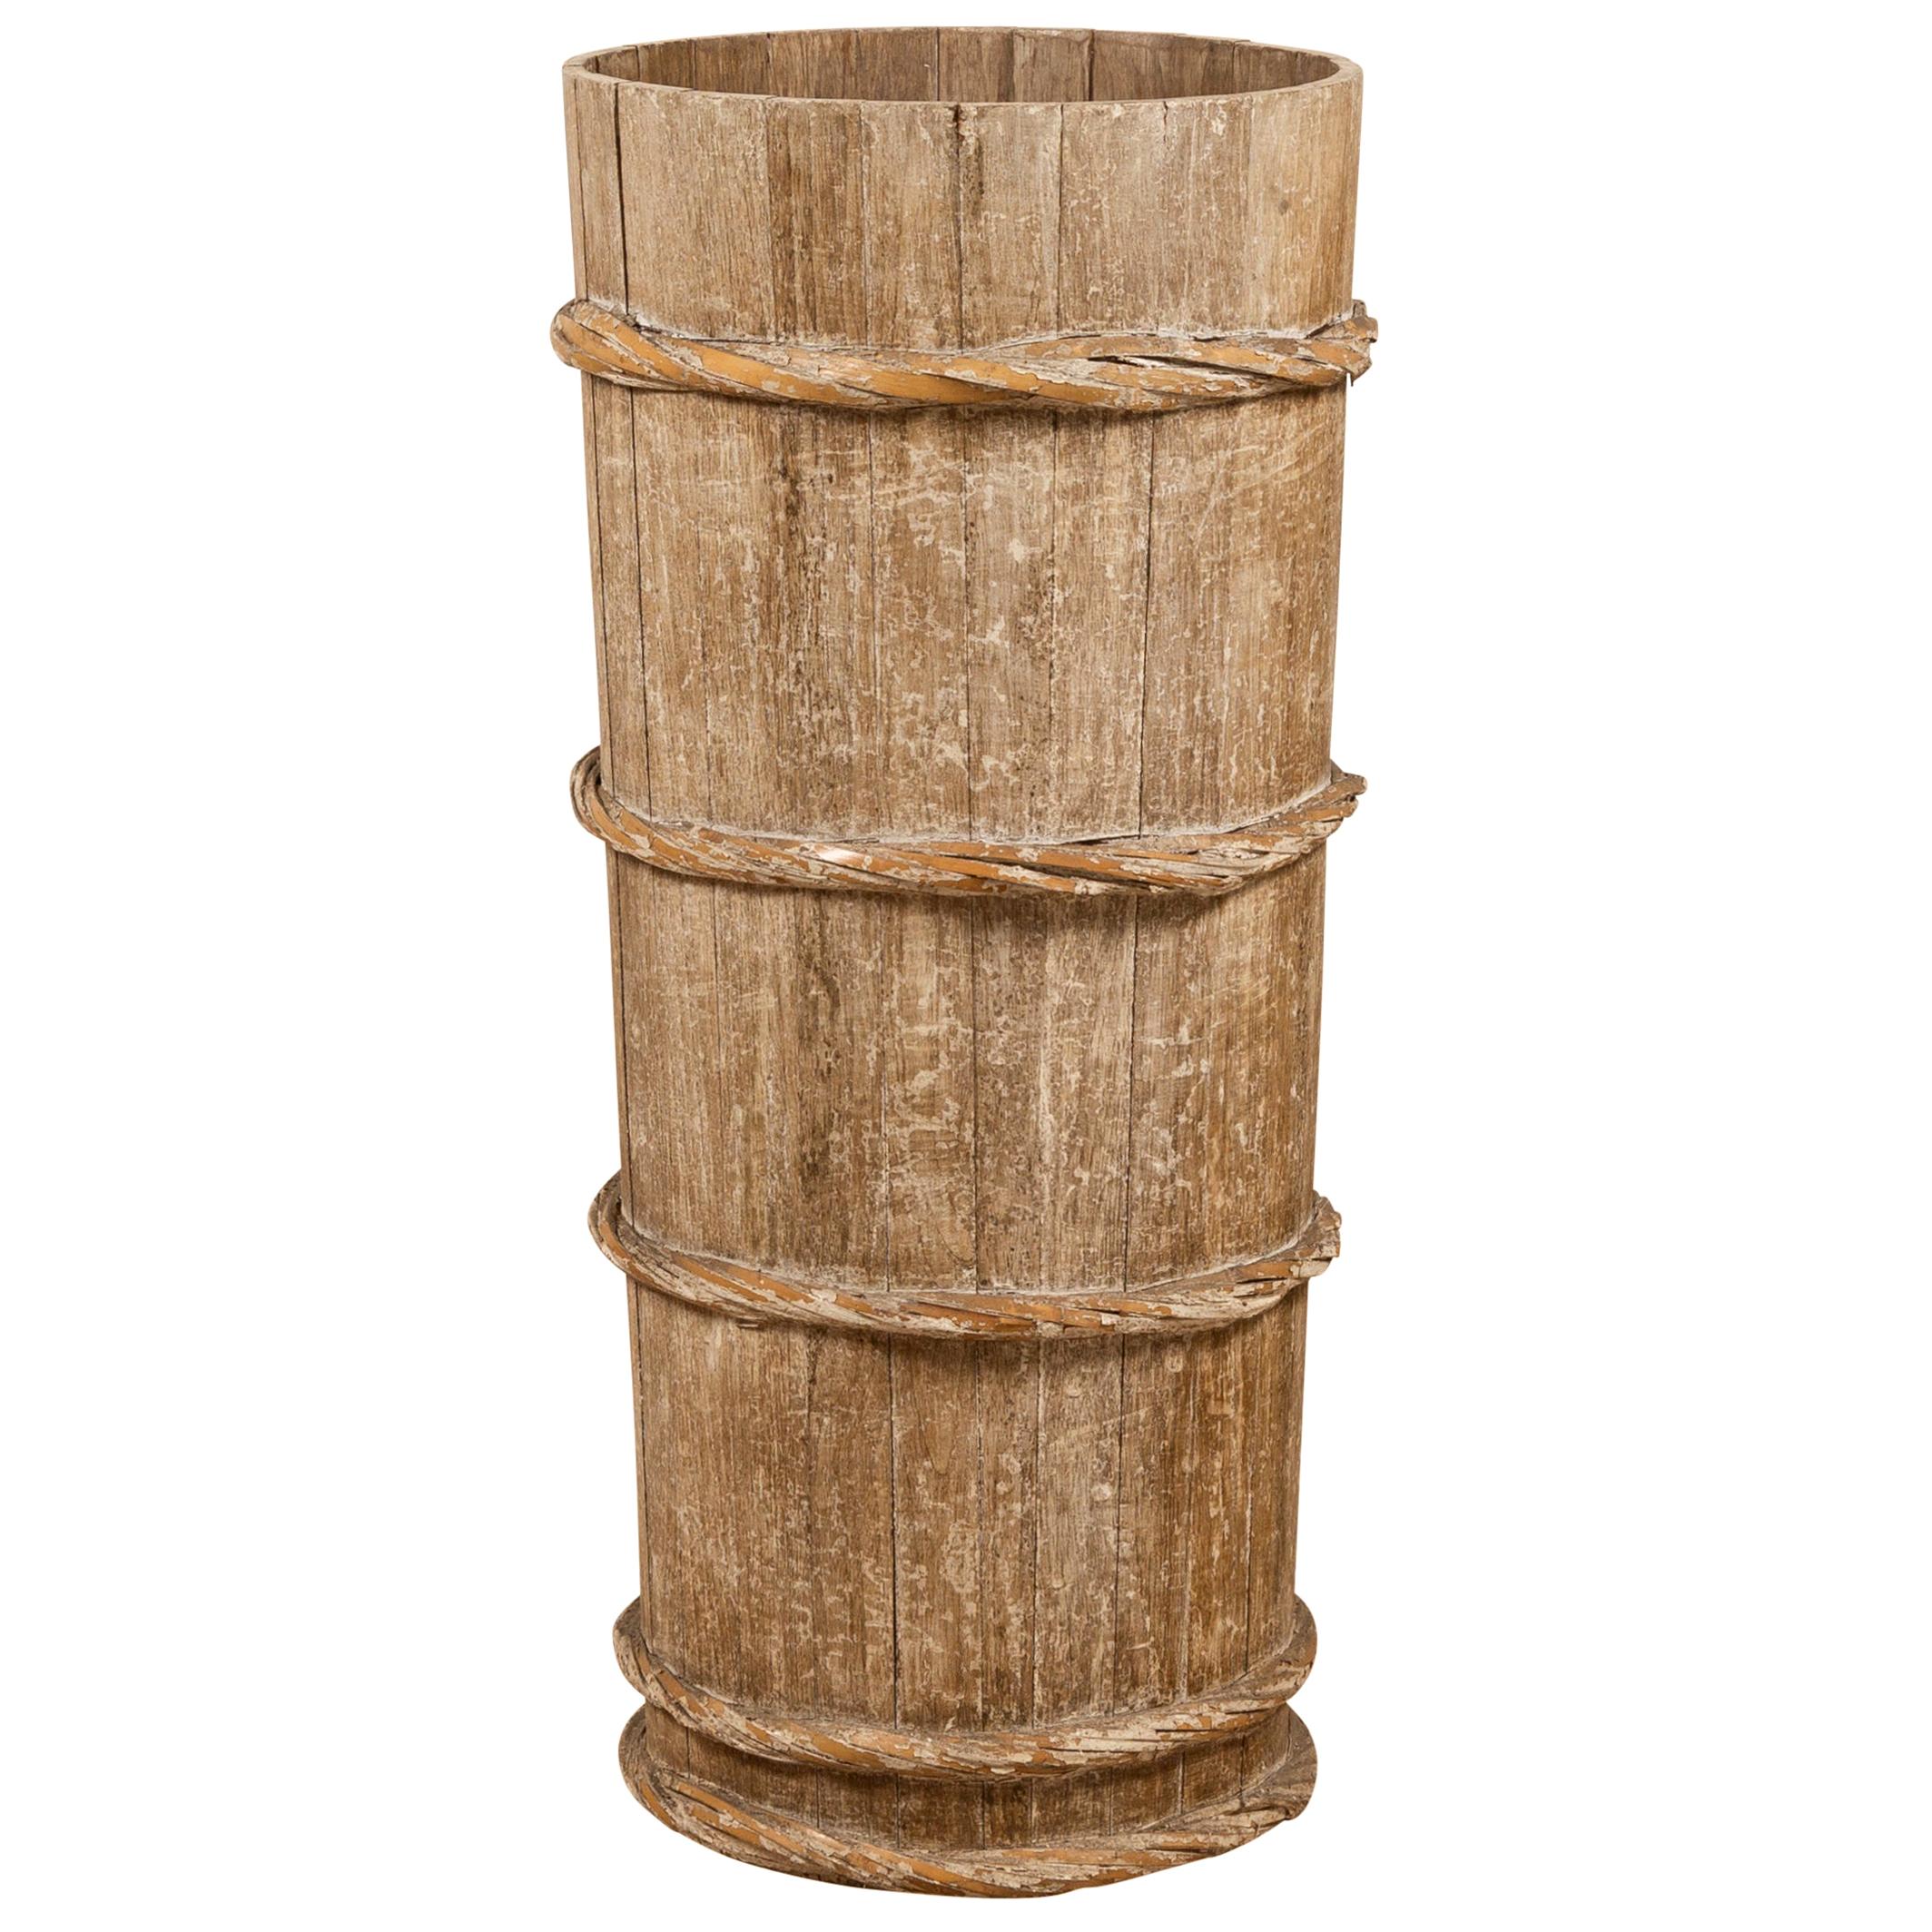 Tall Vintage Rustic Wooden Barrel with Slatted Body and Rope-Style Motifs For Sale